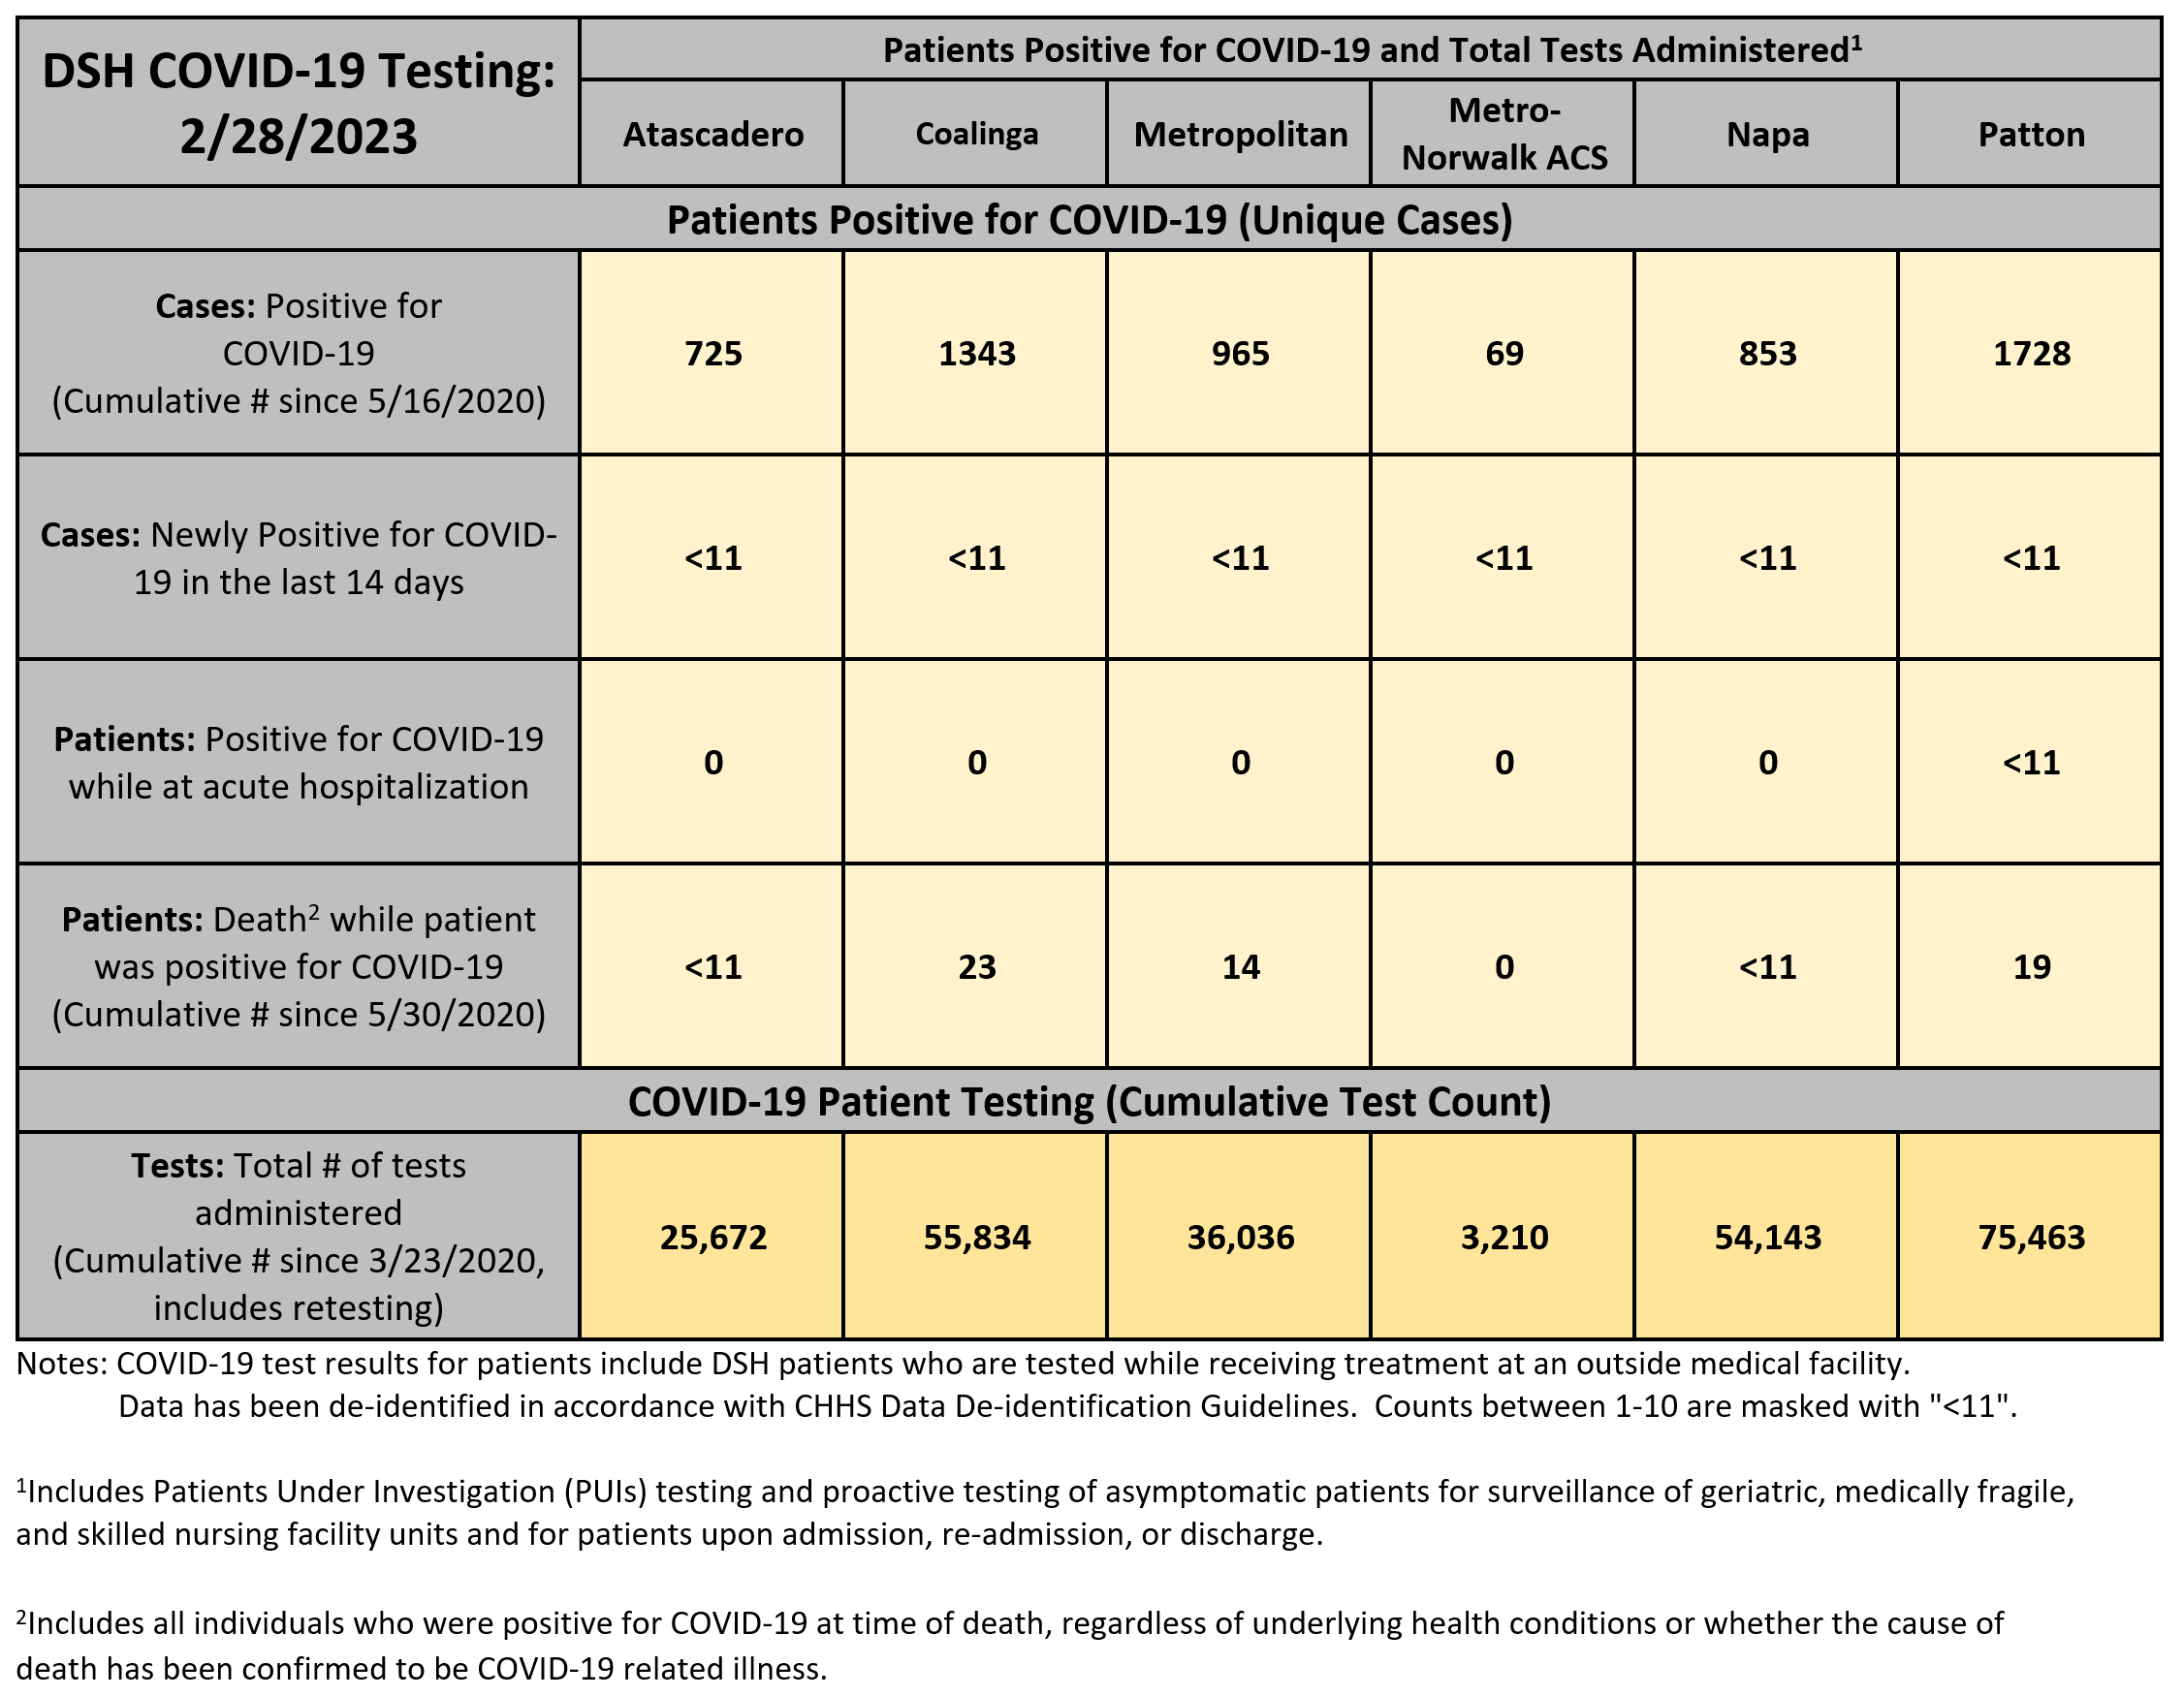 DSH COVID-19 Testing: As of 2/28/2023, Patients Positive for COVID-19 and Total Tests Administered, Cases: Positive for COVID-19 (Cumulative Number since 5/16/2020) - Atascadero: 725, Coalinga: 1343, Metropolitan: 965, Metro-Norwalk ACS: 69, Napa: 853, Patton: 1728 � Next Row: Cases: Newly Positive for COVID-19 in the last 14 days � Atascadero: Less than 11, Coalinga: Less than 11, Metropolitan: Less than 11, Metro-Norwalk ACS: Less than 11, Napa: Less than 11, Patton: Less than 11 � Next Row: Patients: Positive for COVID-19 while at acute hospitalization � Atascadero: 0, Coalinga: 0, Metropolitan: 0, Metro-Norwalk ACS: 0, Napa: 0, Patton: Less than 11 � Next Row: Patients: Death� while patient was positive for COVID-19 (Cumulative Number since 5/30/2020) � Atascadero: Less Than 11, Coalinga: 23, Metropolitan: 14, Metro-Norwalk ACS: 0, Napa: Less Than 11, Patton: 19, next section - COVID-19 Testing (Cumulative Test Count), Tests: Total Number of tests administered(Cumulative Number since 3/23/2020, includes retesting) - Atascadero: 25,672, Coalinga: 55,834, Metropolitan: 36,036, Metro-Norwalk ACS: 3,210, Napa: 54,143, Patton: 75,463. subnotes: COVID-19 test results for patients include DSH patients who are tested while receiving treatment at an outside medical facility. Data has been de-identified in accordance with CHHS Data De-identification Guidelines. Counts between 1-10 are masked with Less than 11.   Includes Patients Under Investigation (PUIs) testing and proactive testing of asymptomatic patients for surveillance of geriatric, medically fragile, and skilled nursing facility units and for patients upon admission, re-admission, or discharge. Includes all individuals who were positive for COVID-19 at time of death, regardless of underlying health conditions or whether the cause of death has been confirmed to be COVID-19 related illness.